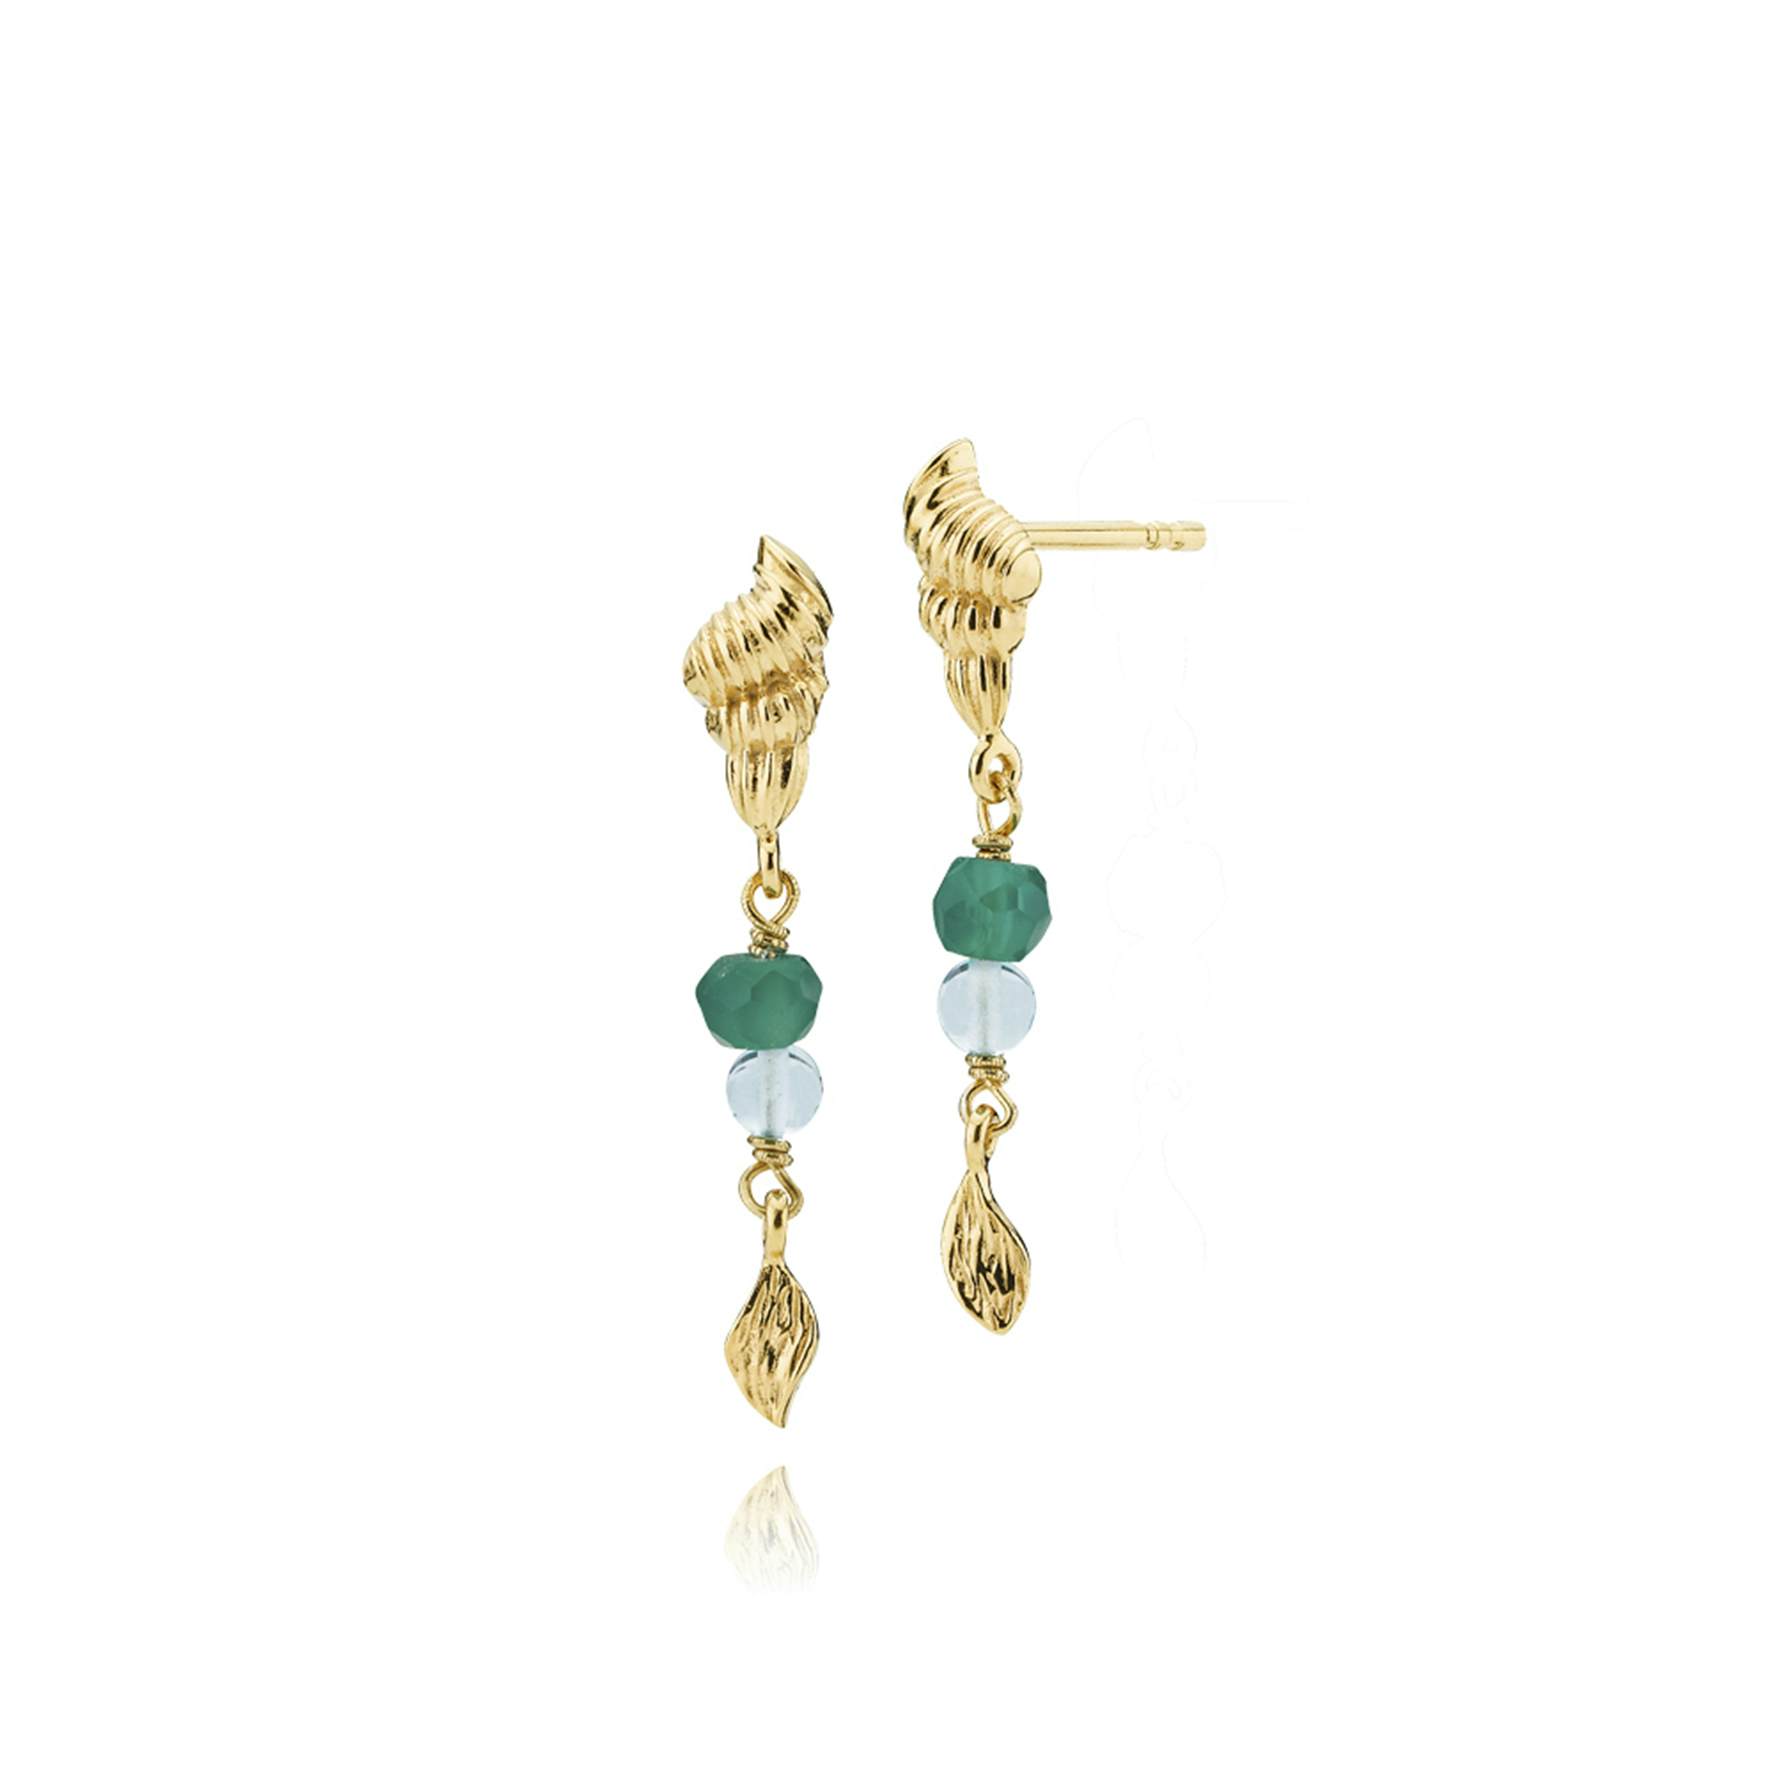 Kaia Earrings Green Onyx and Aqua Crystal from Sistie in Goldplated-Silver Sterling 925|Blank